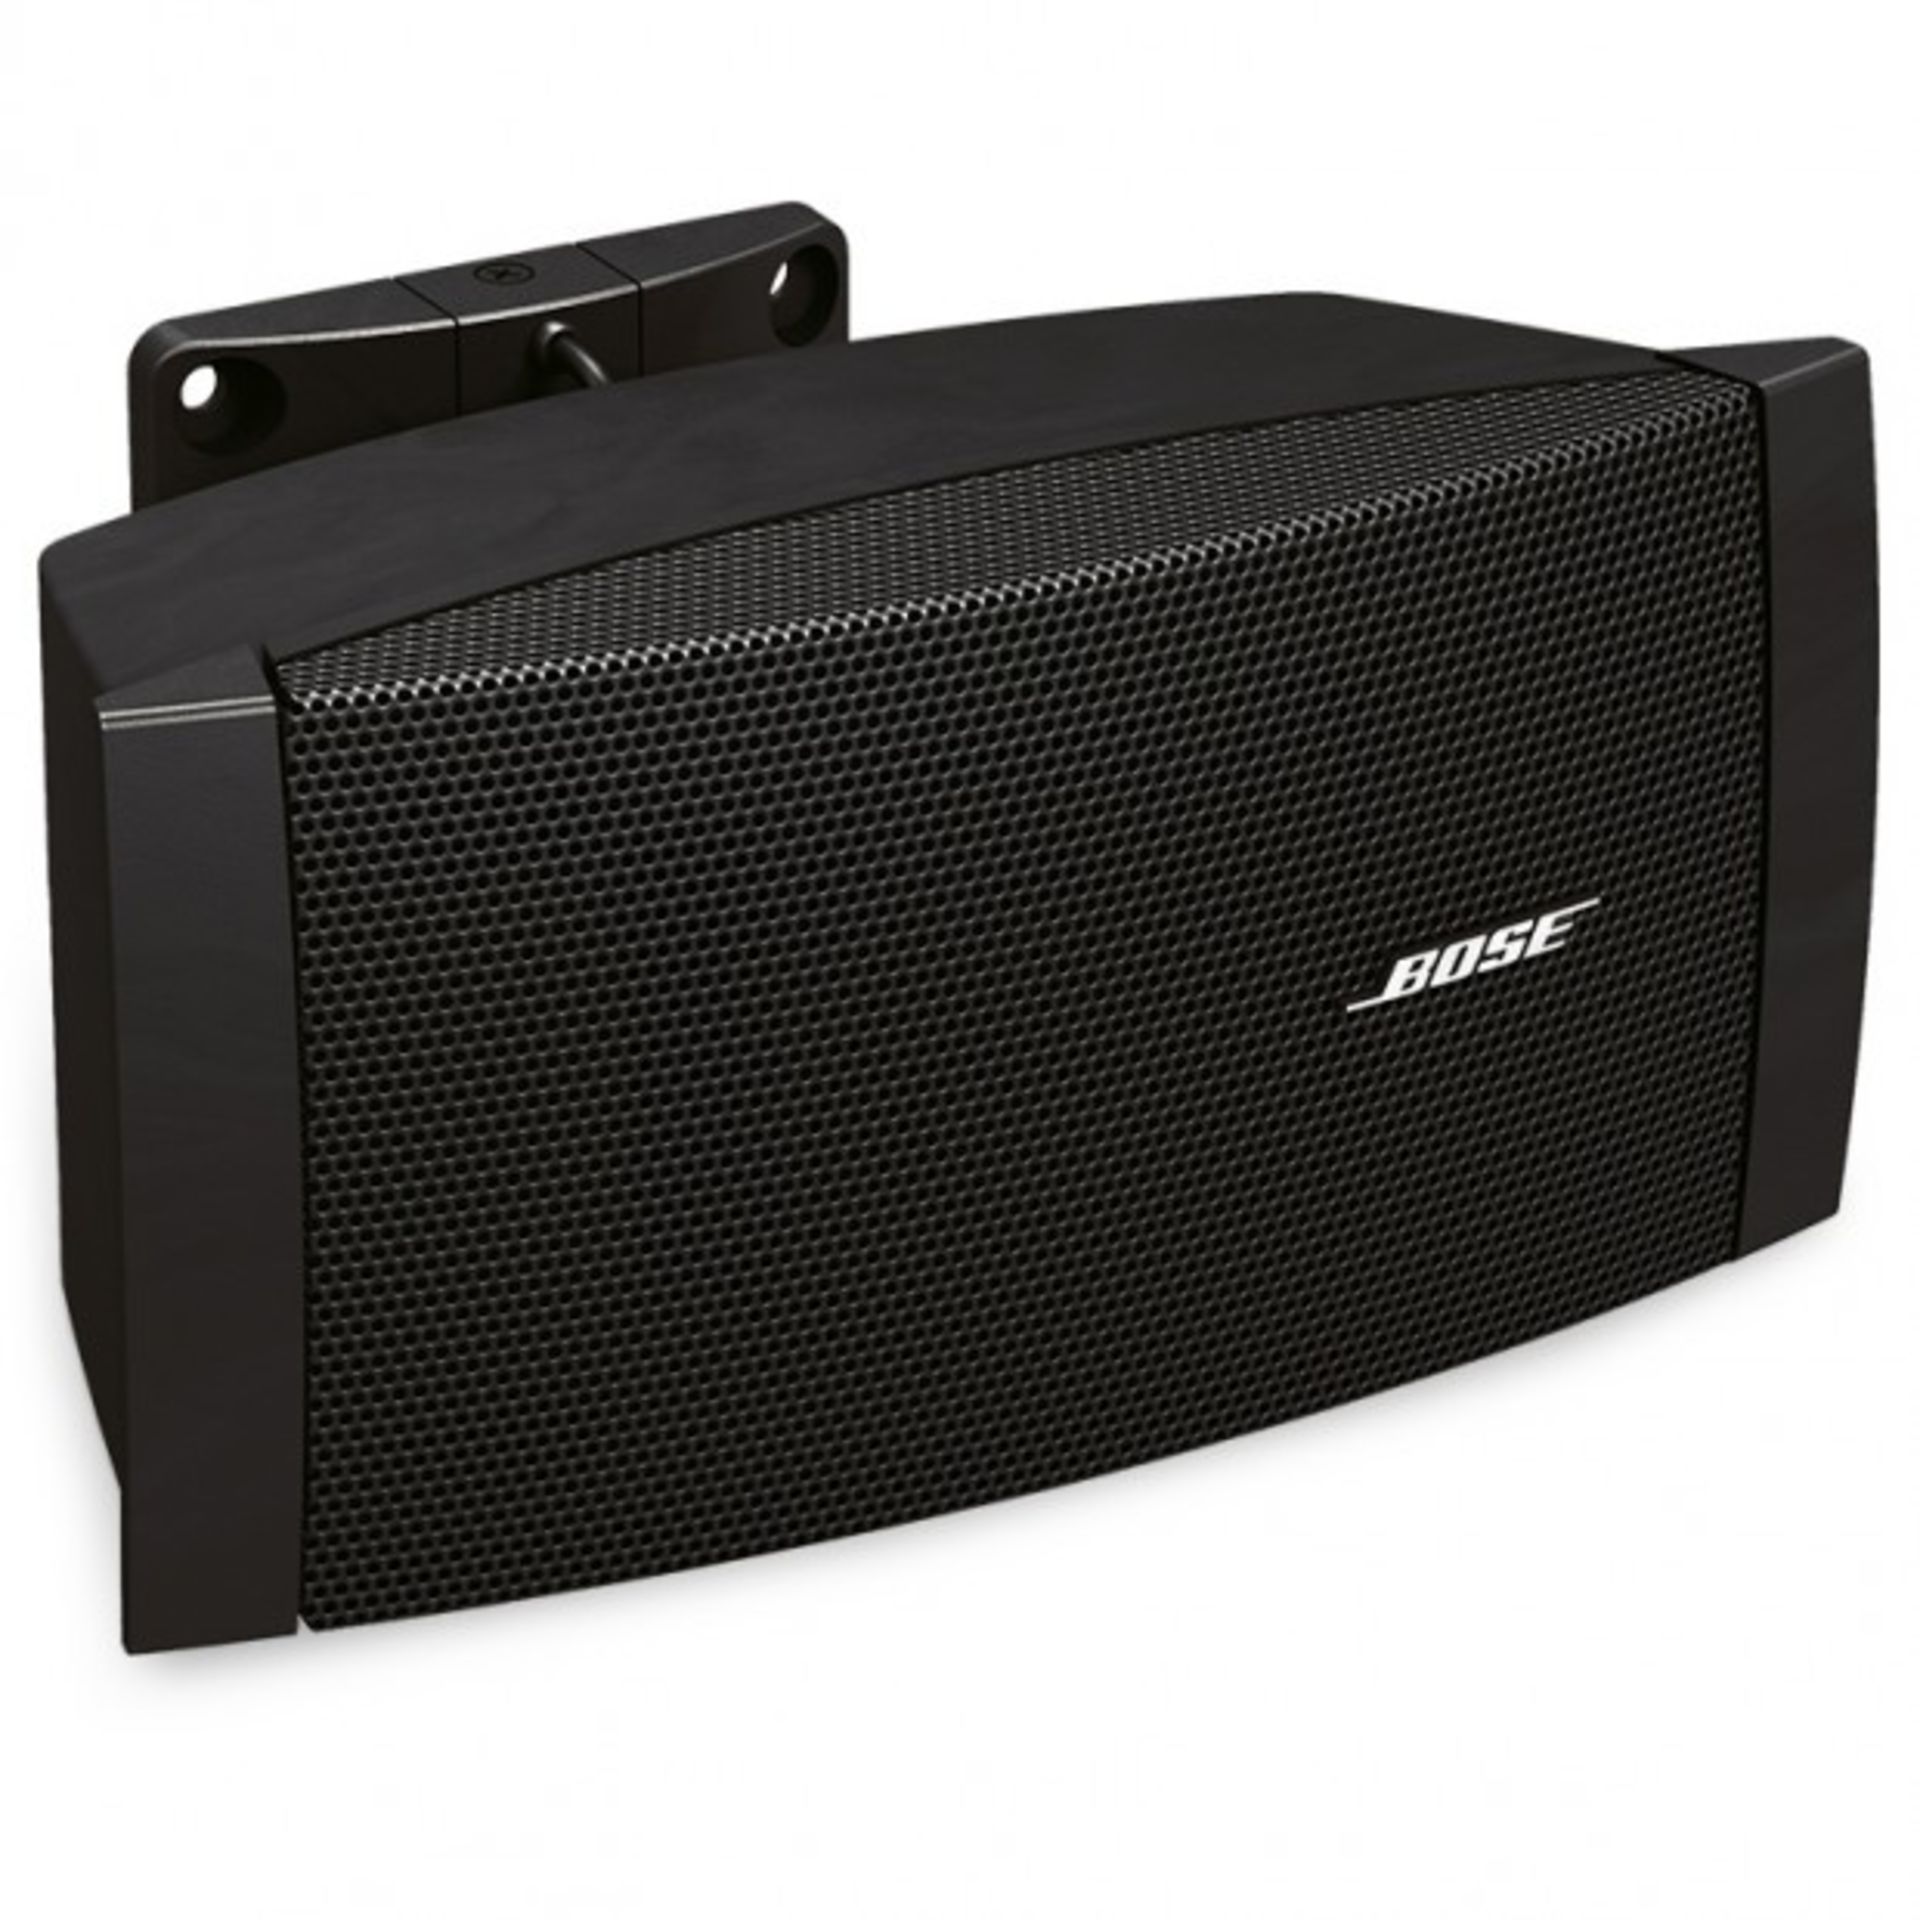 1 x Bose FreeSpace DS16S Indoor Surface-Mount Loudspeaker in Black - RRP £150 - CL584 - Location: